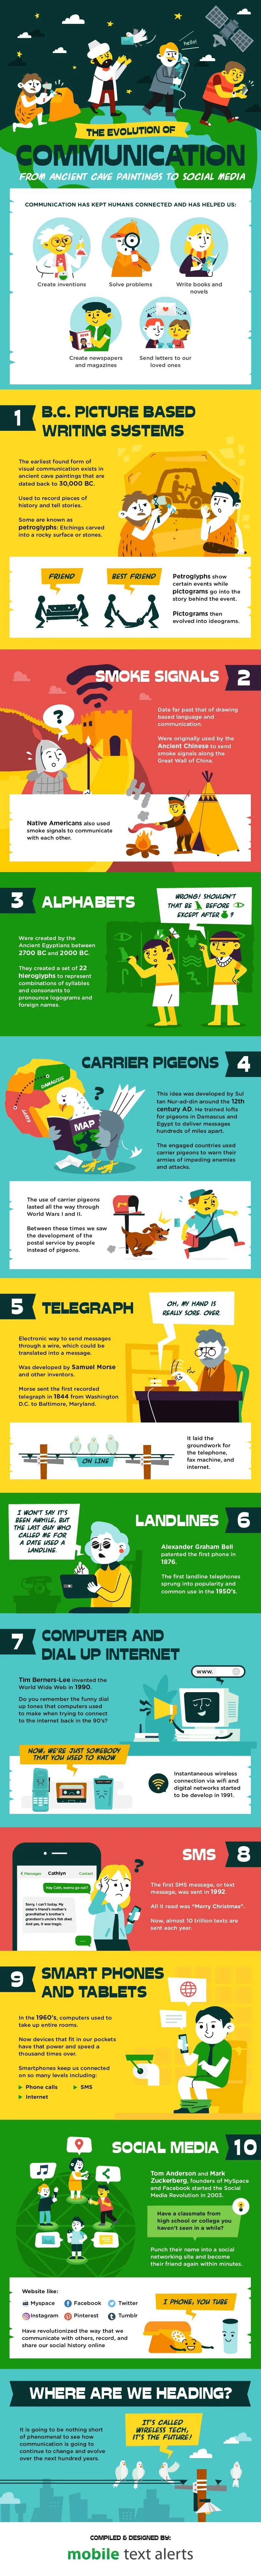 The Evolution of Communication - #infographic